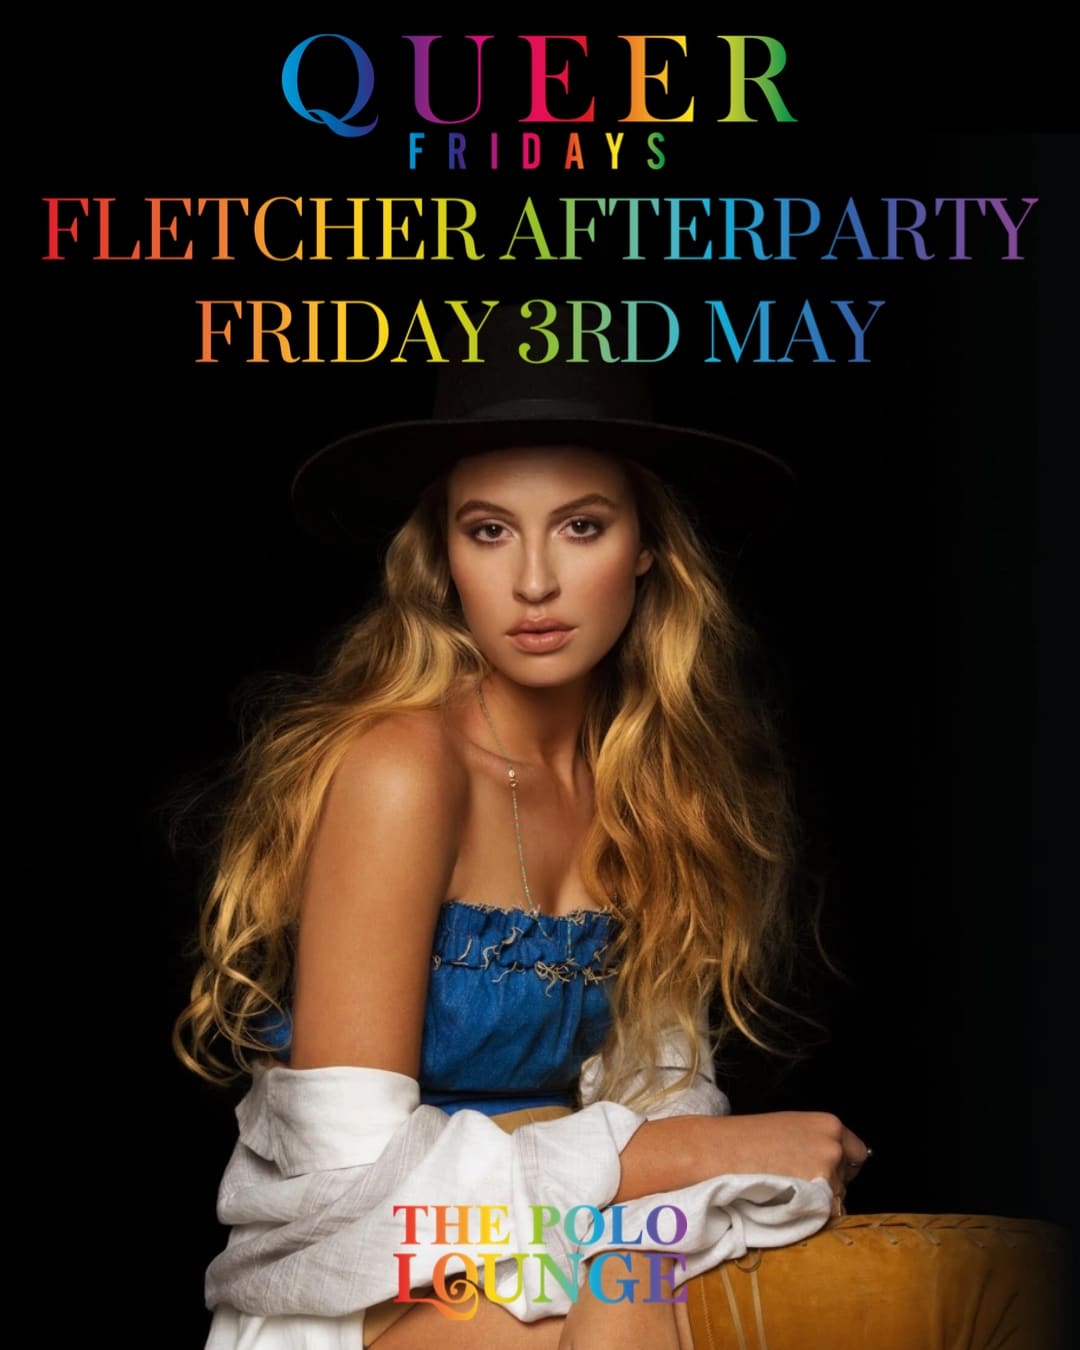 FLETCHER AFTER PARTY